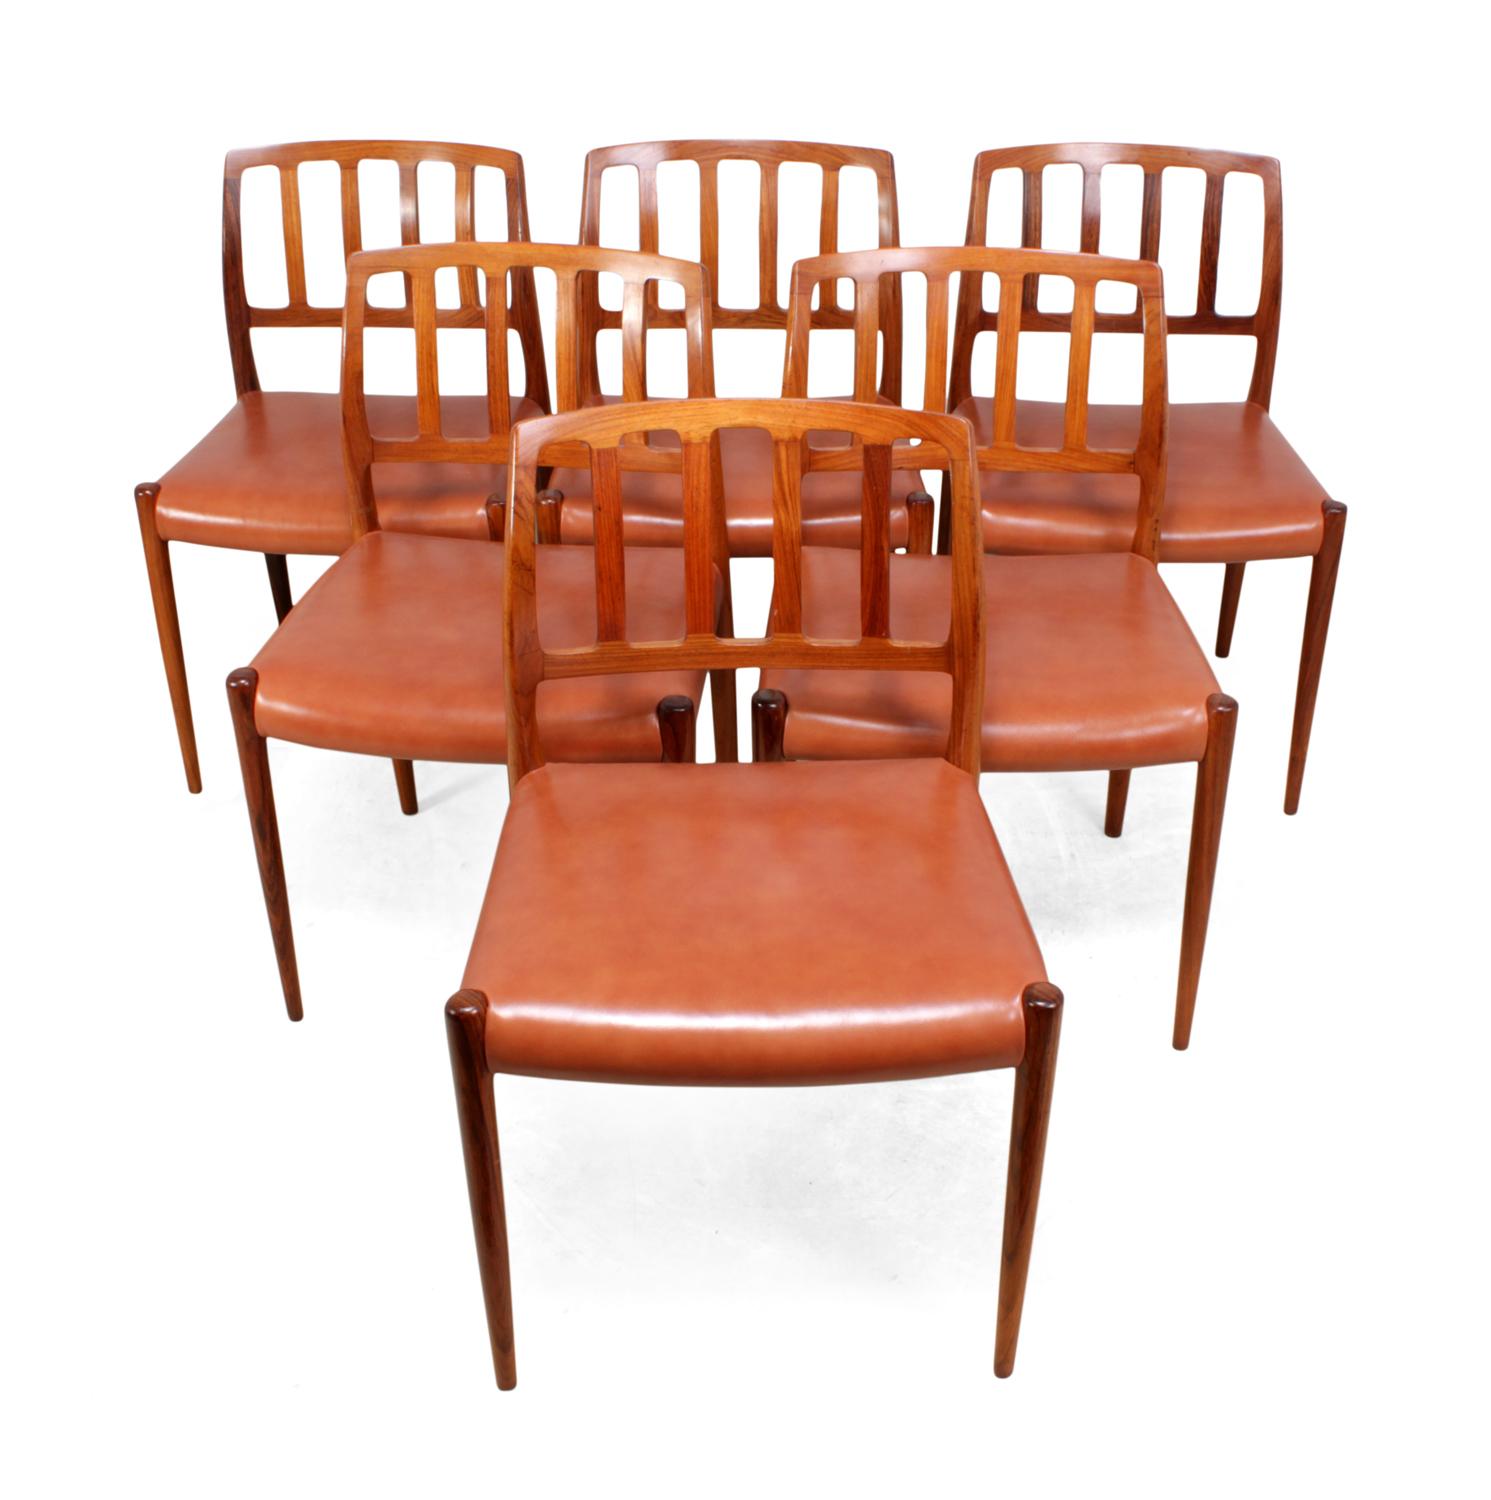 Midcentury rosewood dining chairs by Moller model 83
This set of six model 83 dining chairs was designed by Niels O. Møller in Denmark, in 1974. they are in santos rosewood with new brown leather upholstery

the chairs are in excellent condition